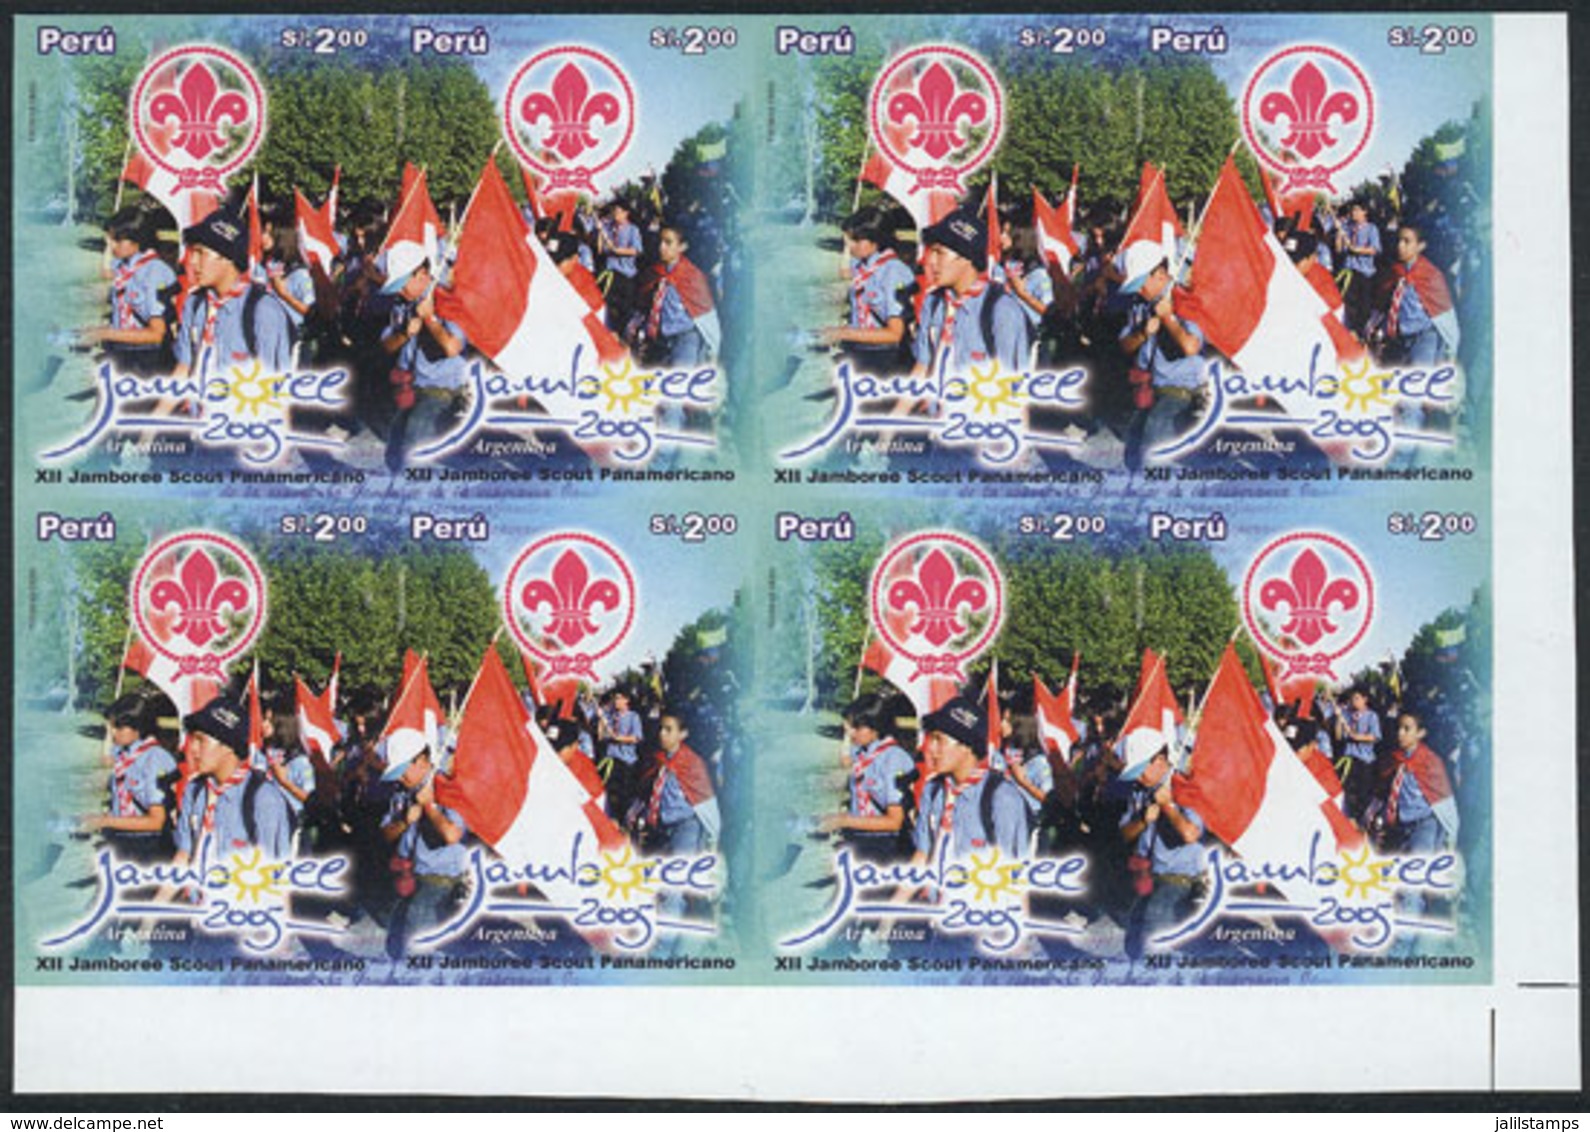 PERU: Sc.1502, 2006 Scouts, 12th Jamboree Of Argentina, IMPERFORATE BLOCK OF 4 Consisting Of 4 Sets, Excellent Quality,  - Peru